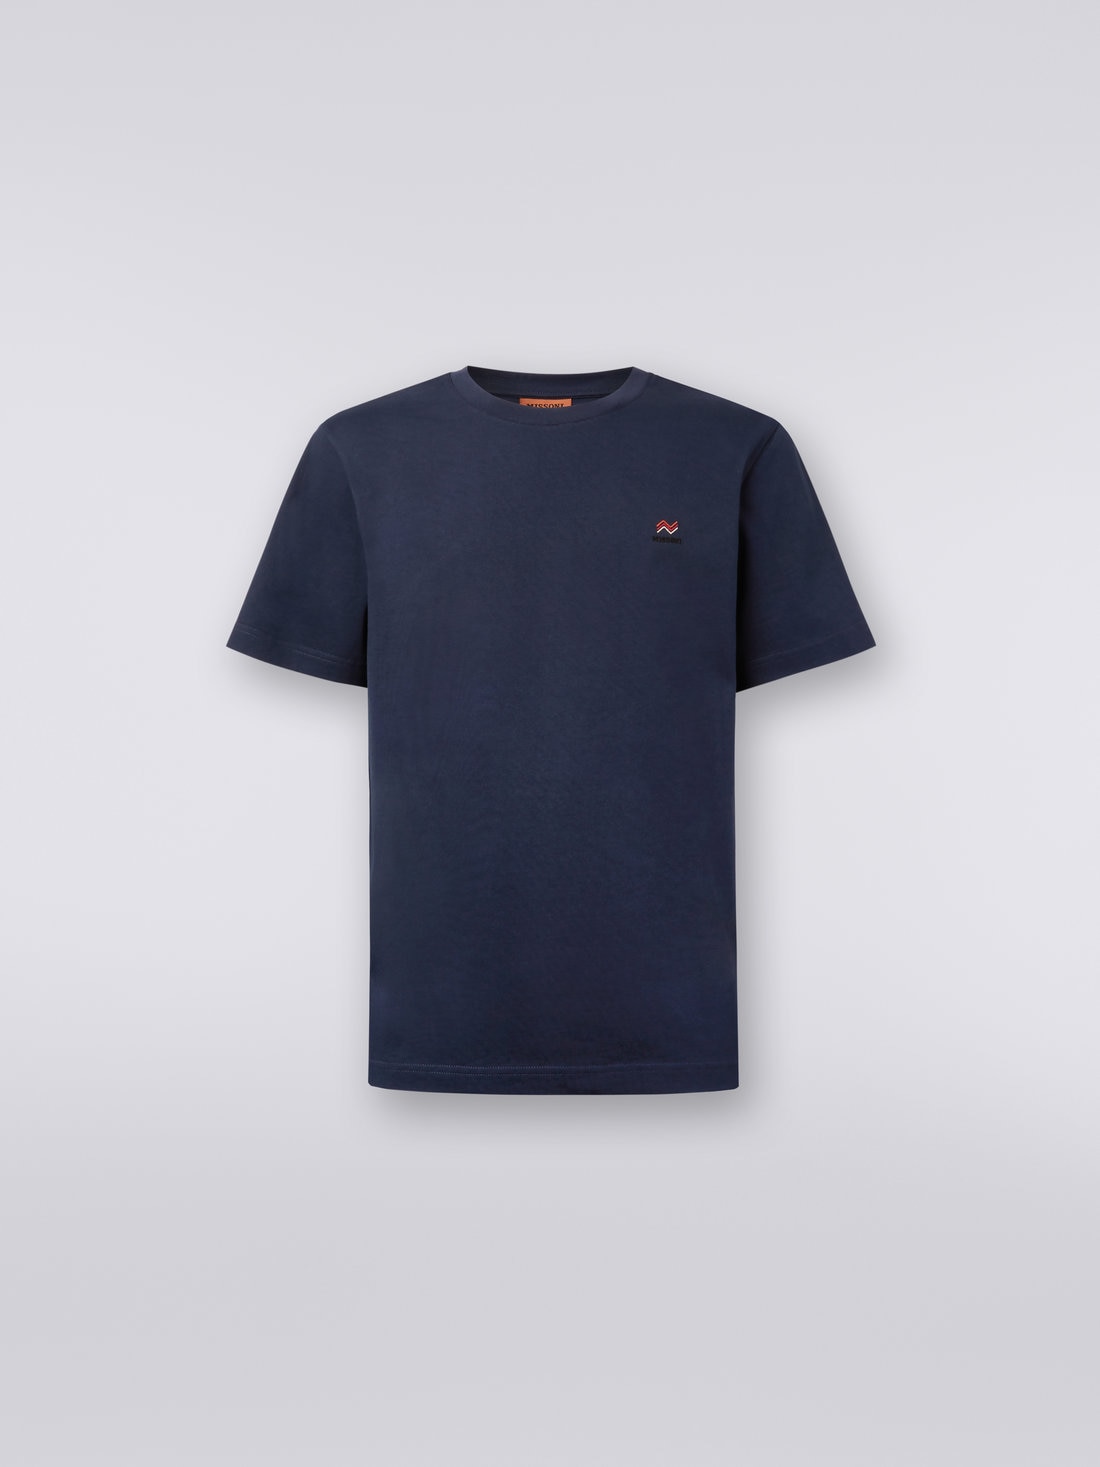 Crew-neck cotton T-shirt with embroidery and logo, Blue - US23WL0KBJ00IE93924 - 0